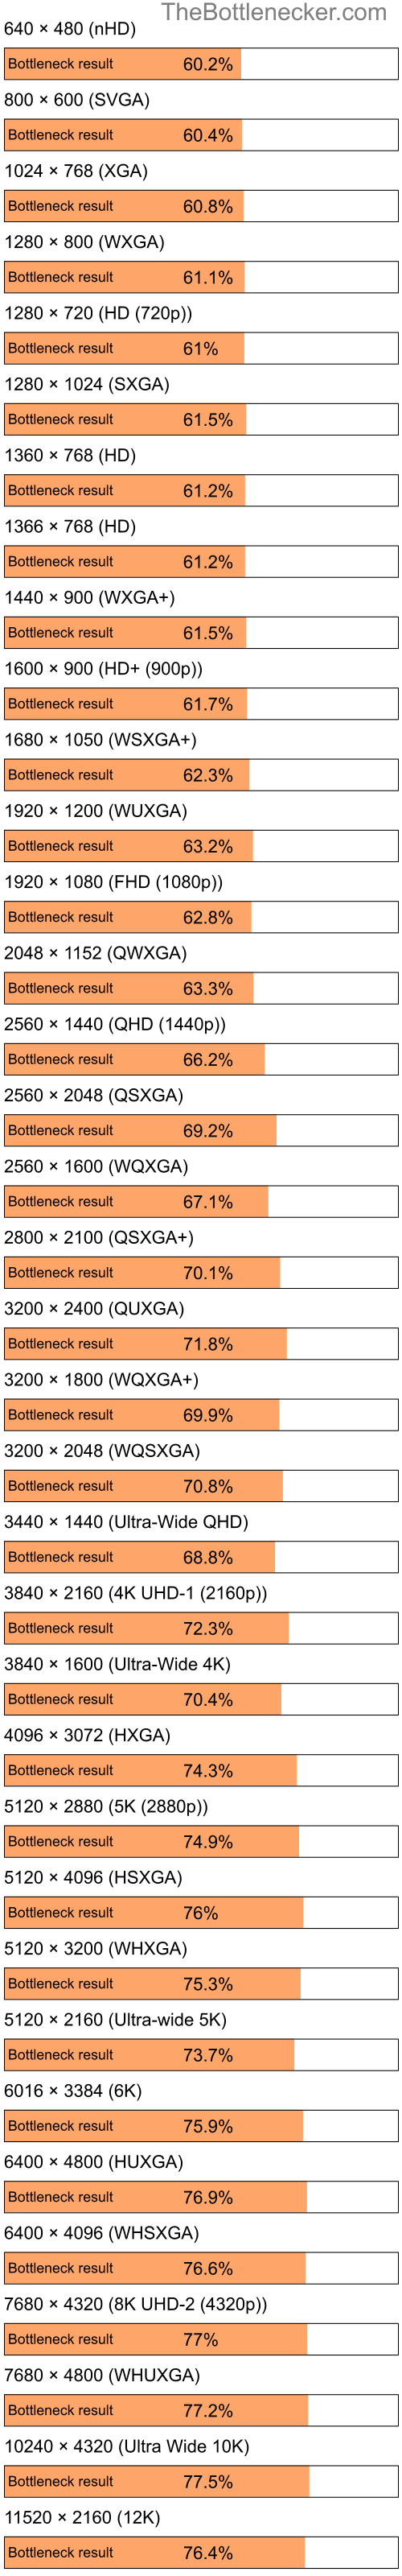 Bottleneck results by resolution for Intel Pentium 4 and AMD Radeon X1650 Pro in General Tasks